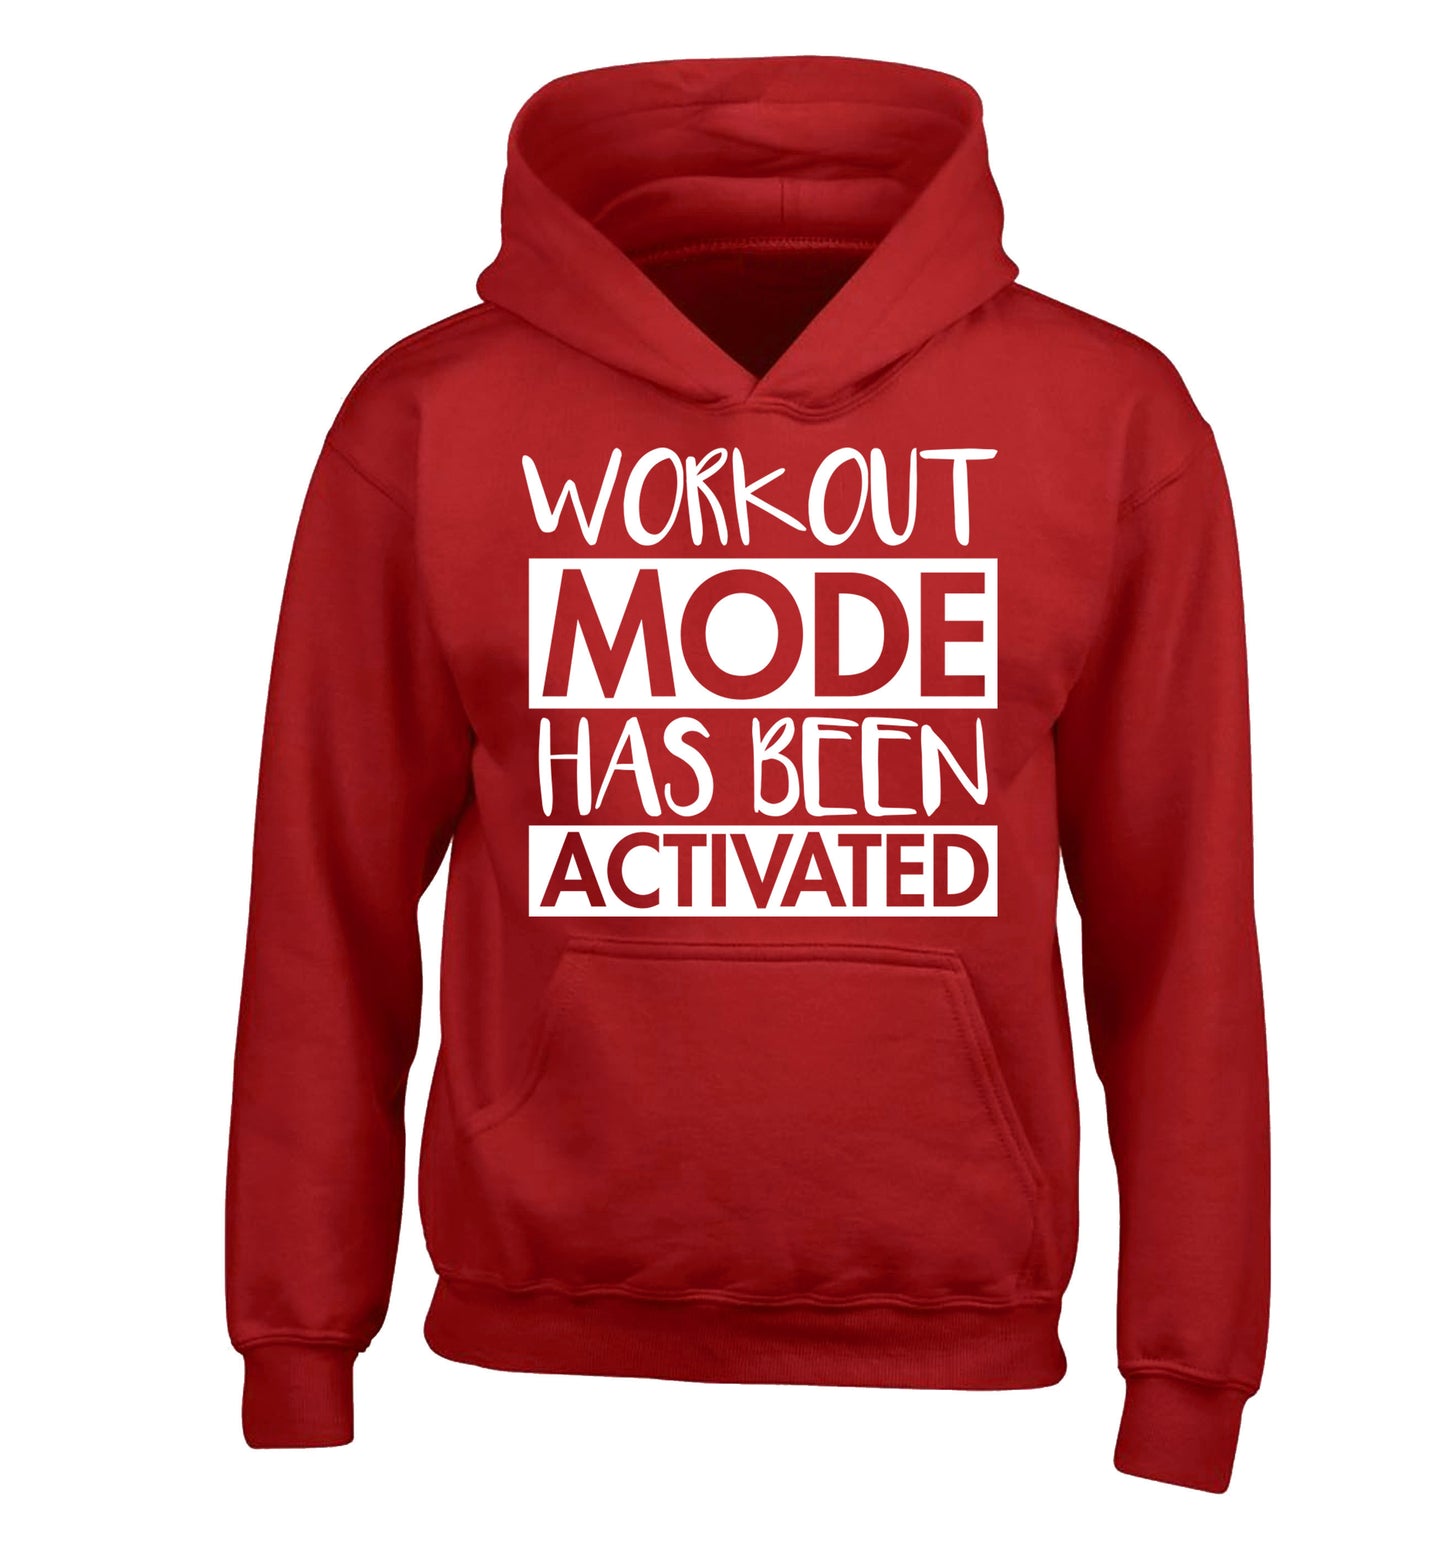 Workout mode has been activated children's red hoodie 12-14 Years